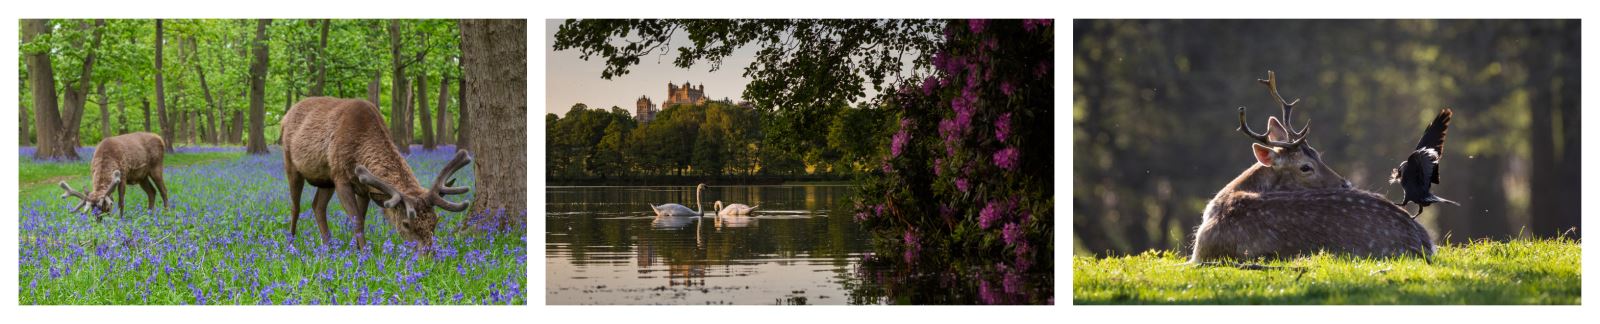 Spring at Wollaton Hall - Photography by Chris Denning